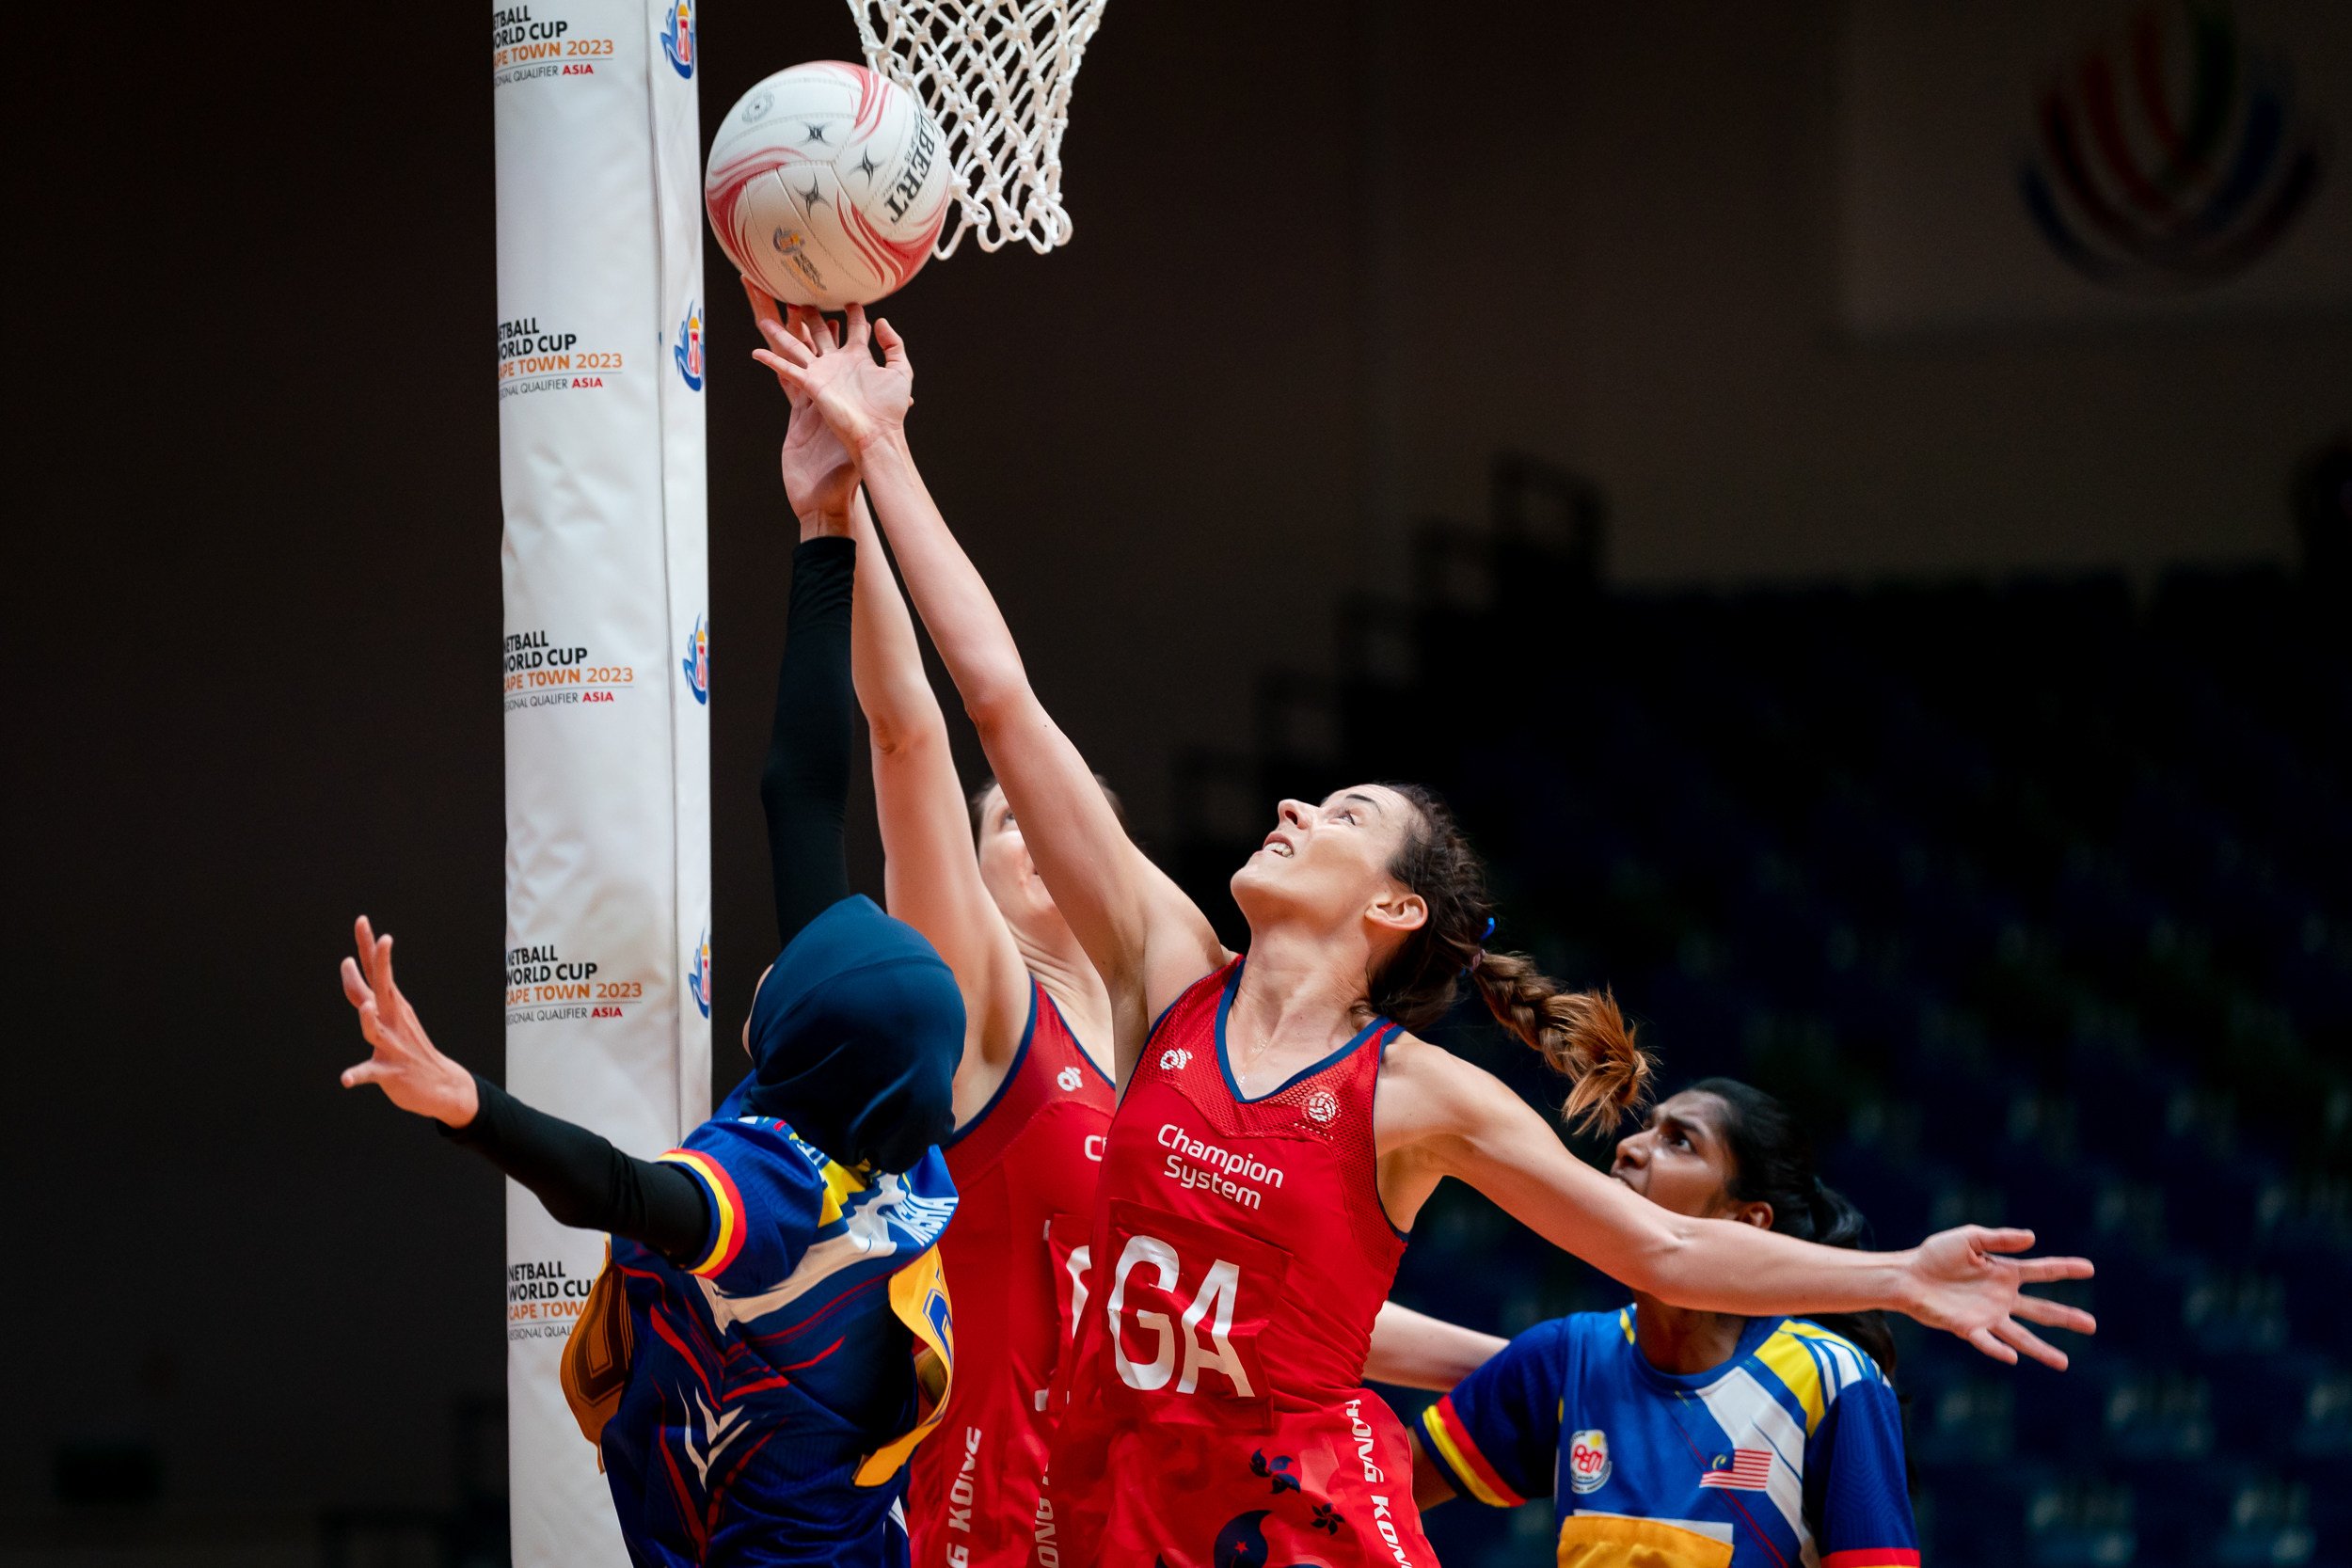 Hong Kong’s Elderi Wiese in action against Malaysia during the Asian Netball Association. Photo: Netball Singapore